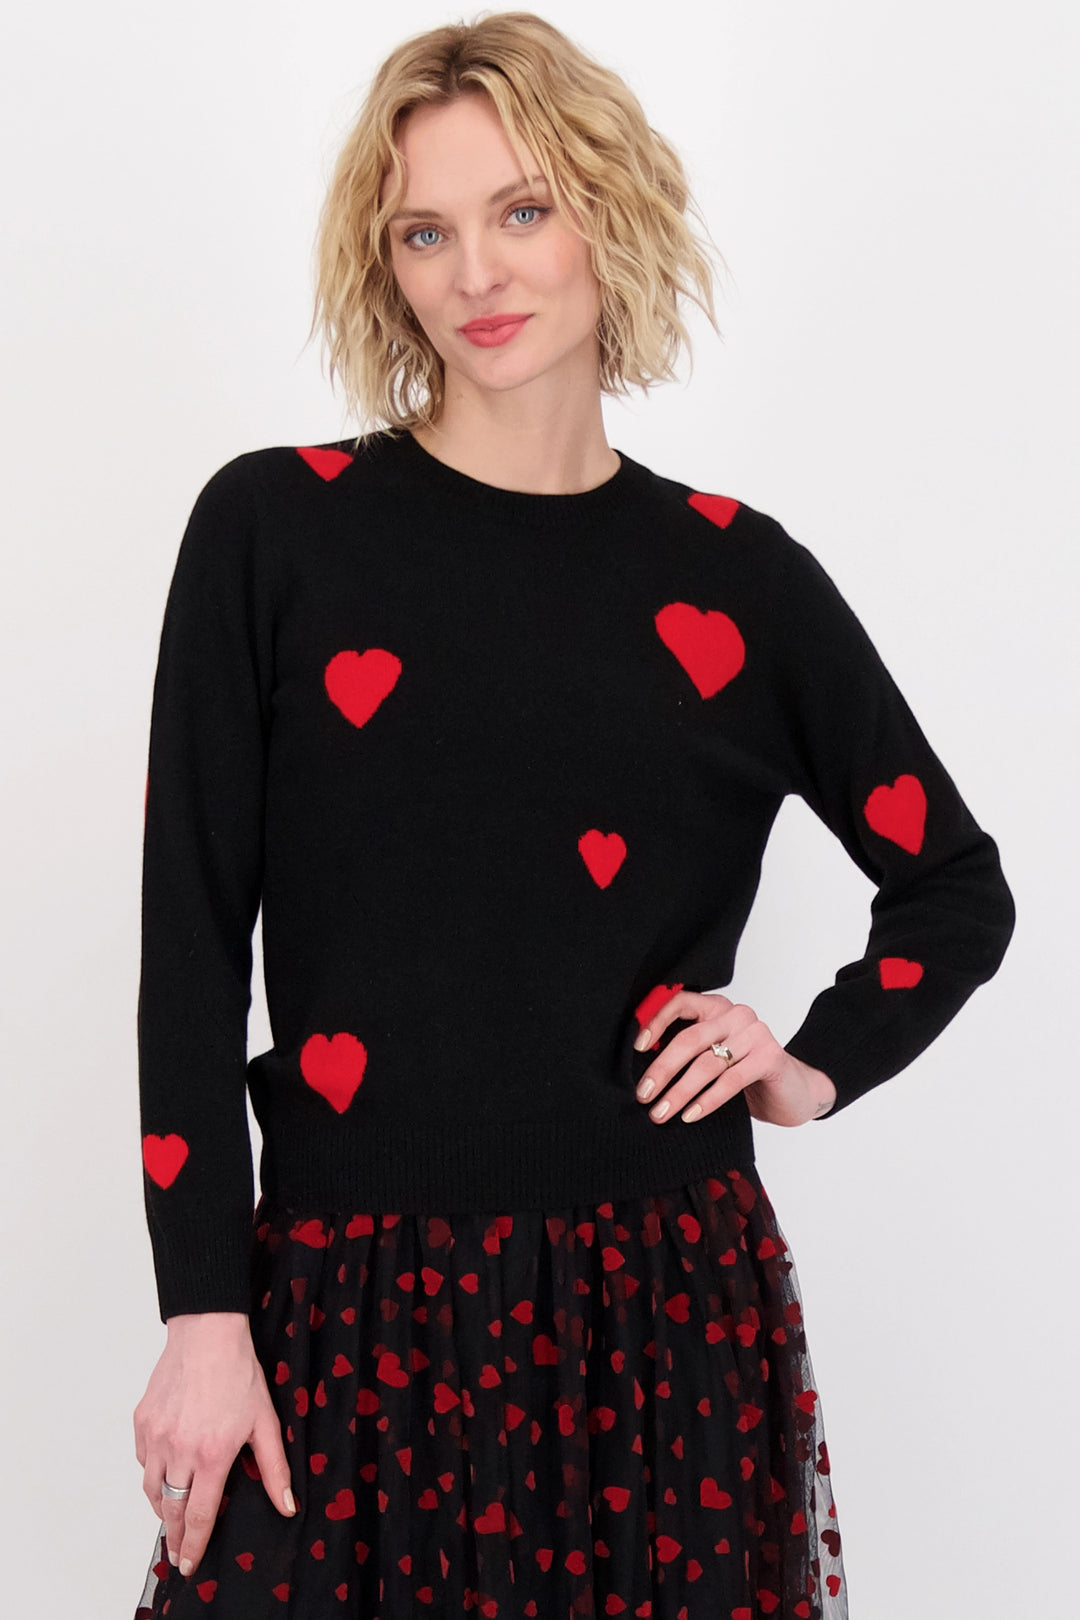 This classic round neck top has full length sleeves and features a beautiful hearts pattern on the front and sides.